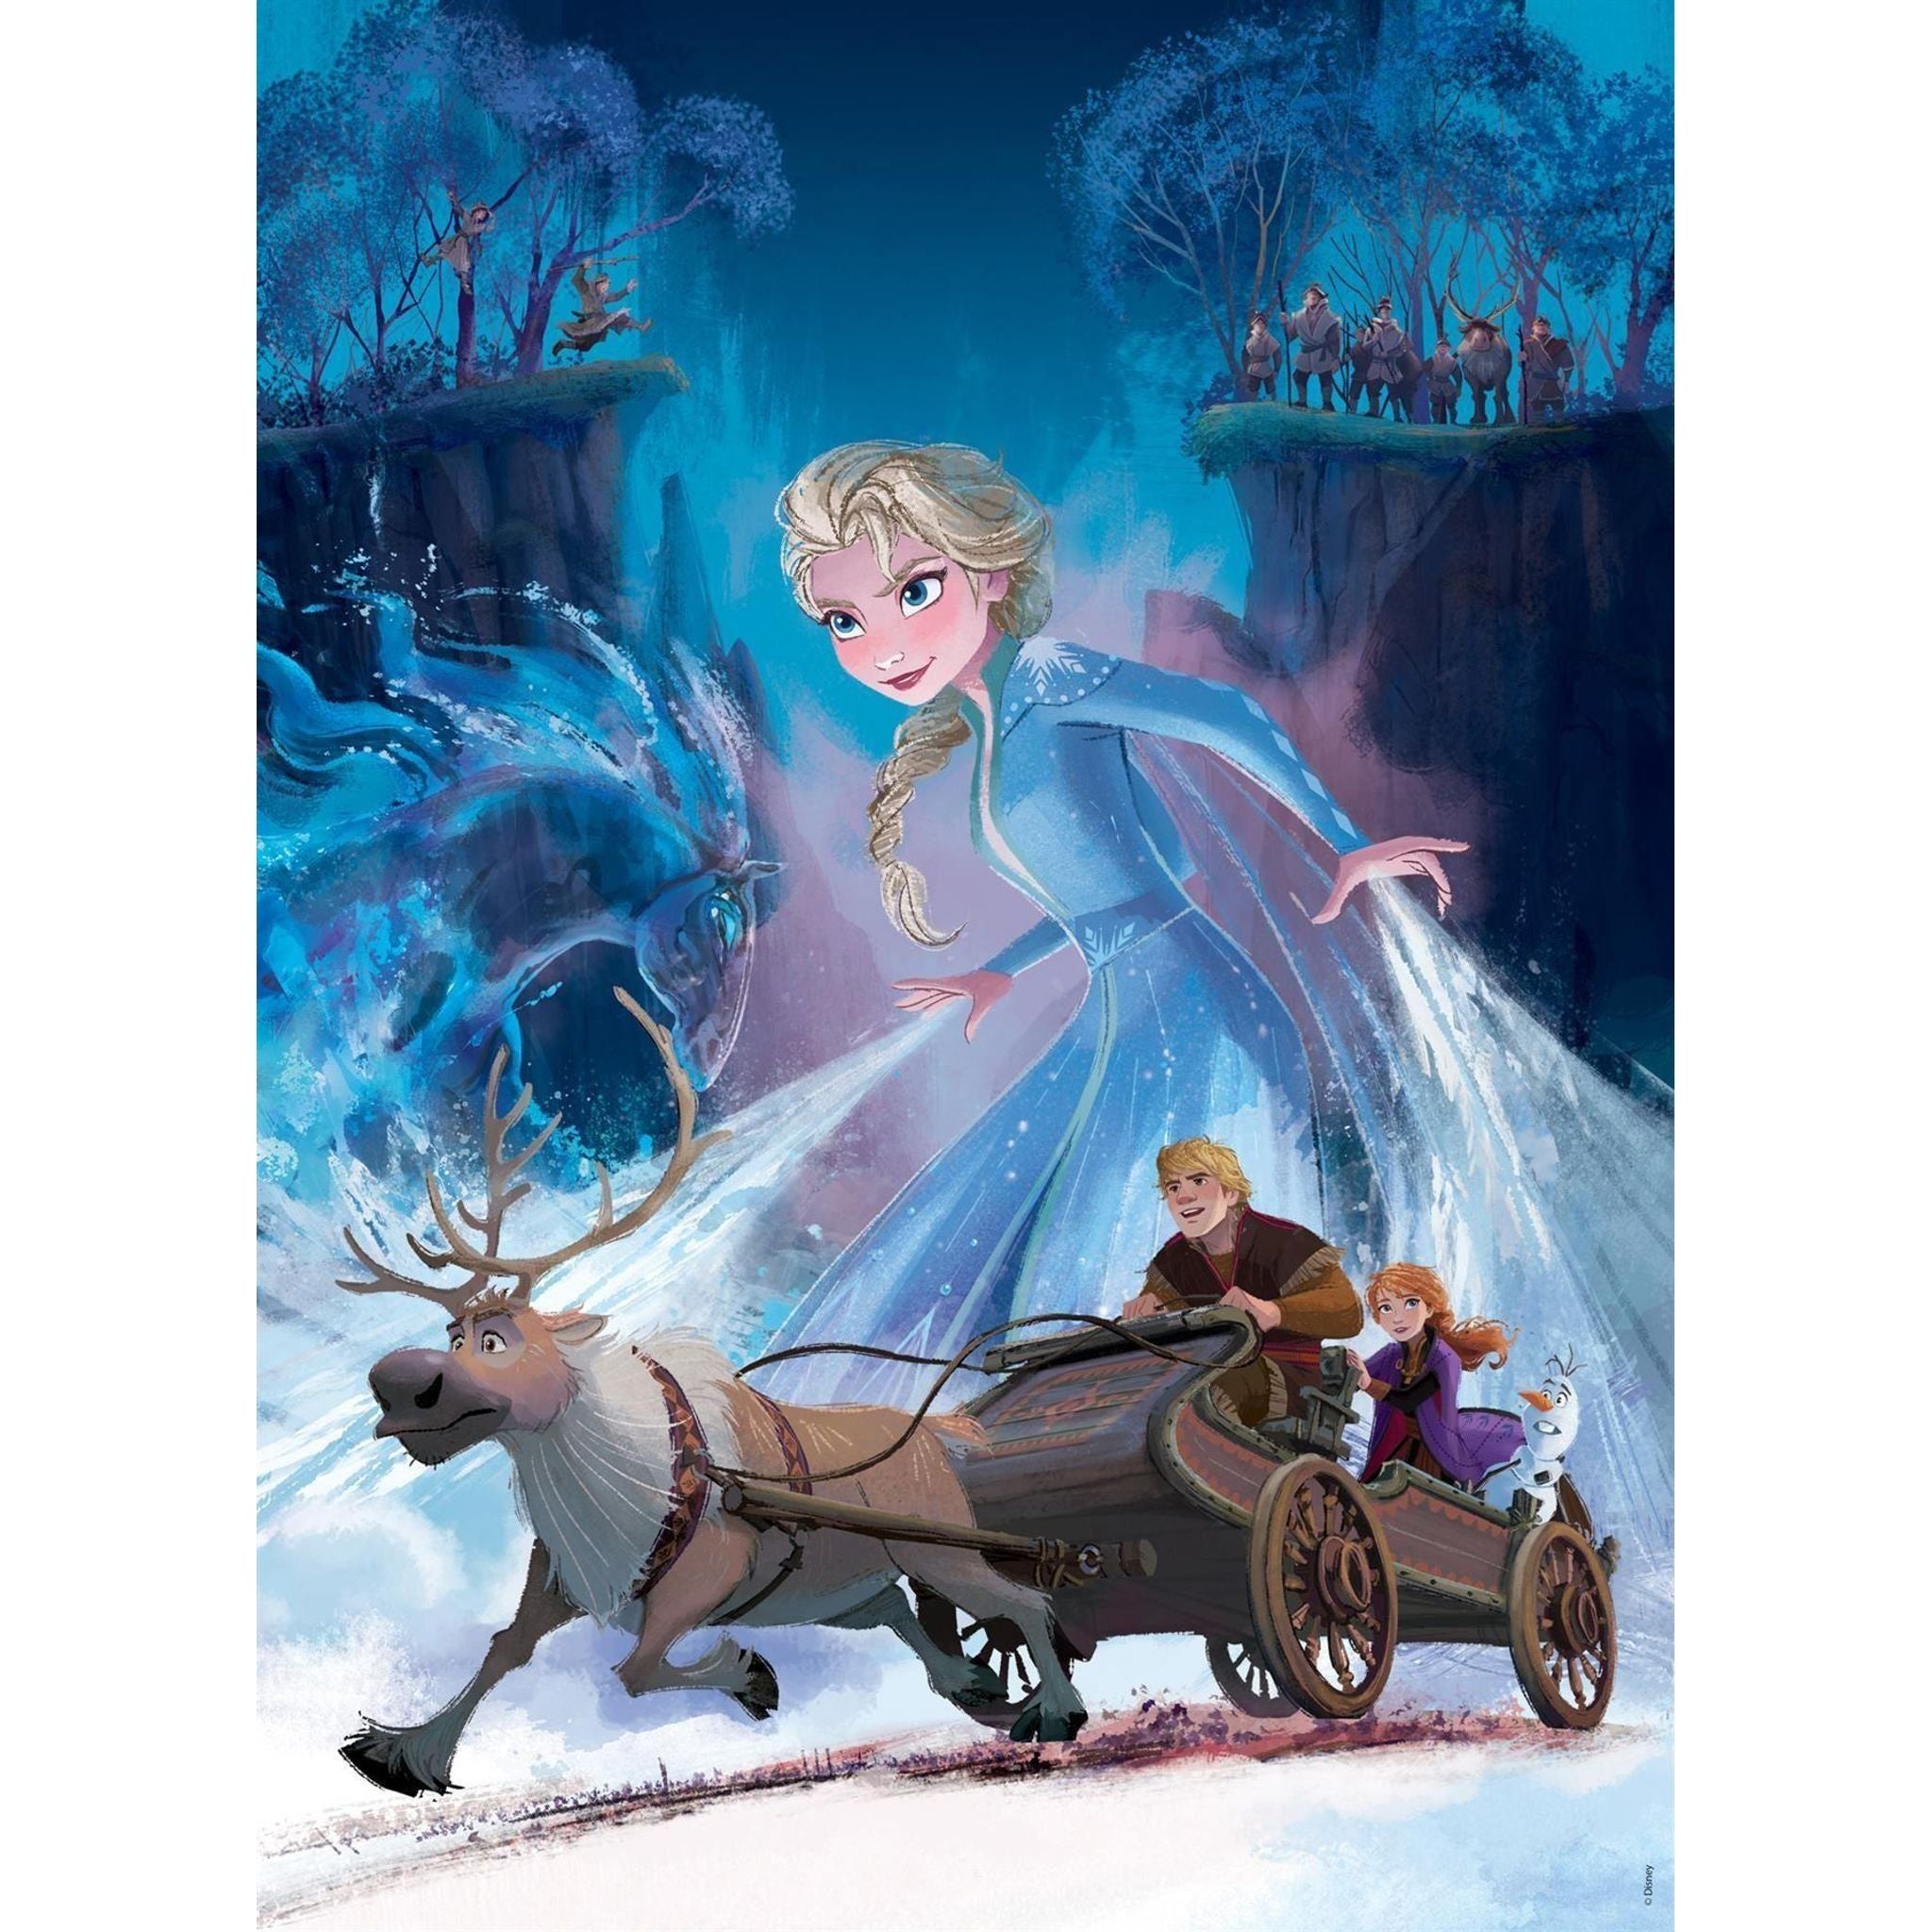 Ravensburger - Frozen 2 The Mysterious Forest Puzzle - 200 Pieces - Toybox Tales